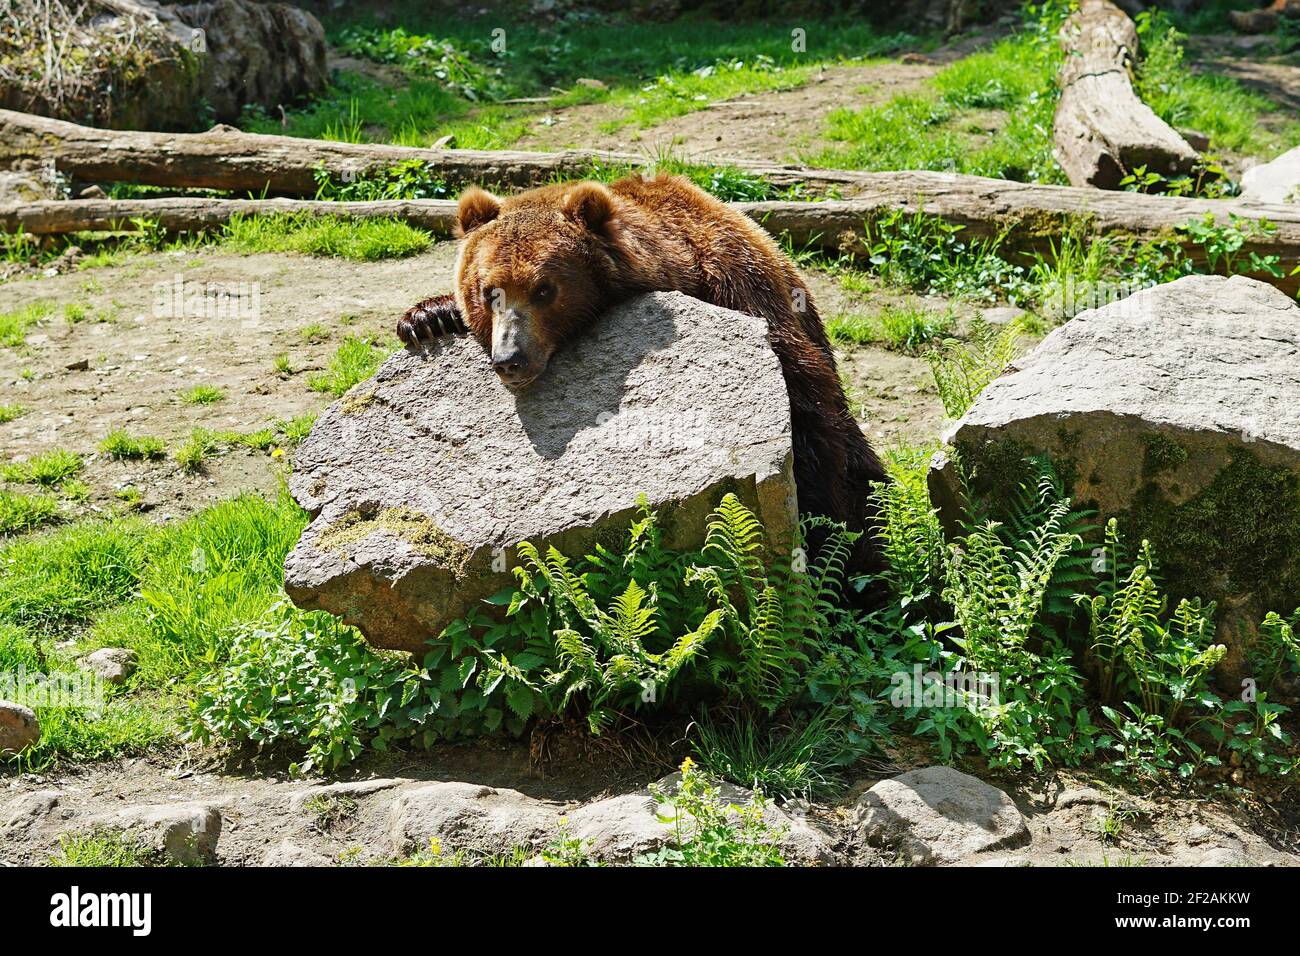 Grizzly bear, North American brown bear relaxing on stone Stock Photo